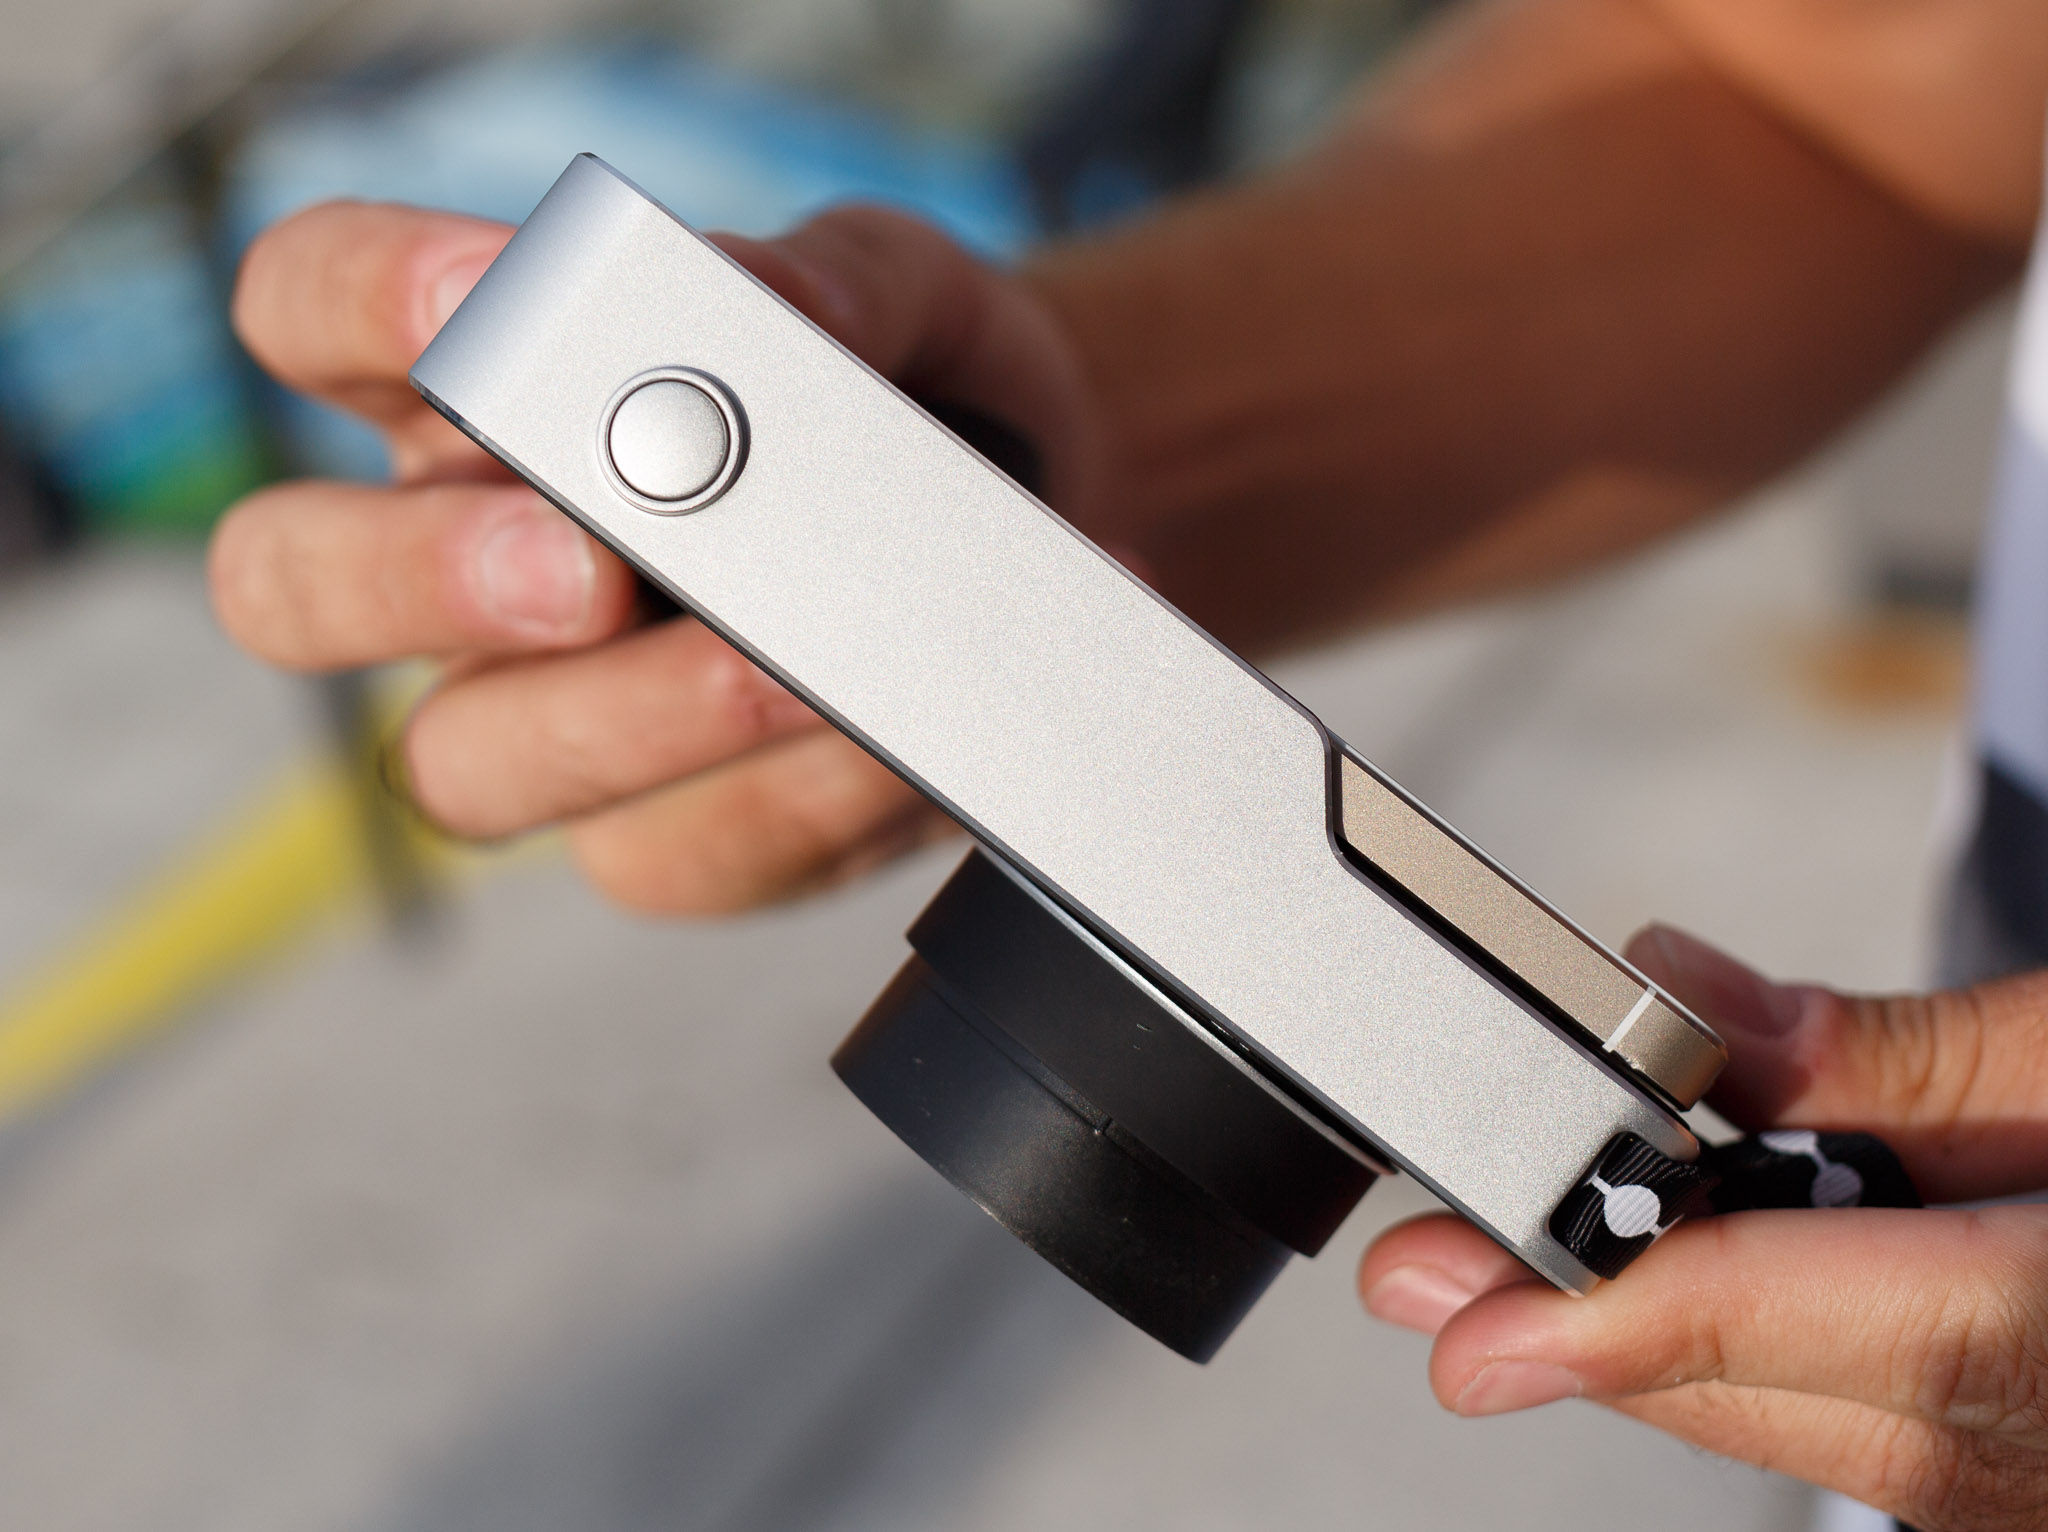 The Relonch Camera, shown here with an iPhone slotted in, has just a single shutter-release button for simple operation. This is an engineering prototype of the camera that doesn't actually work.